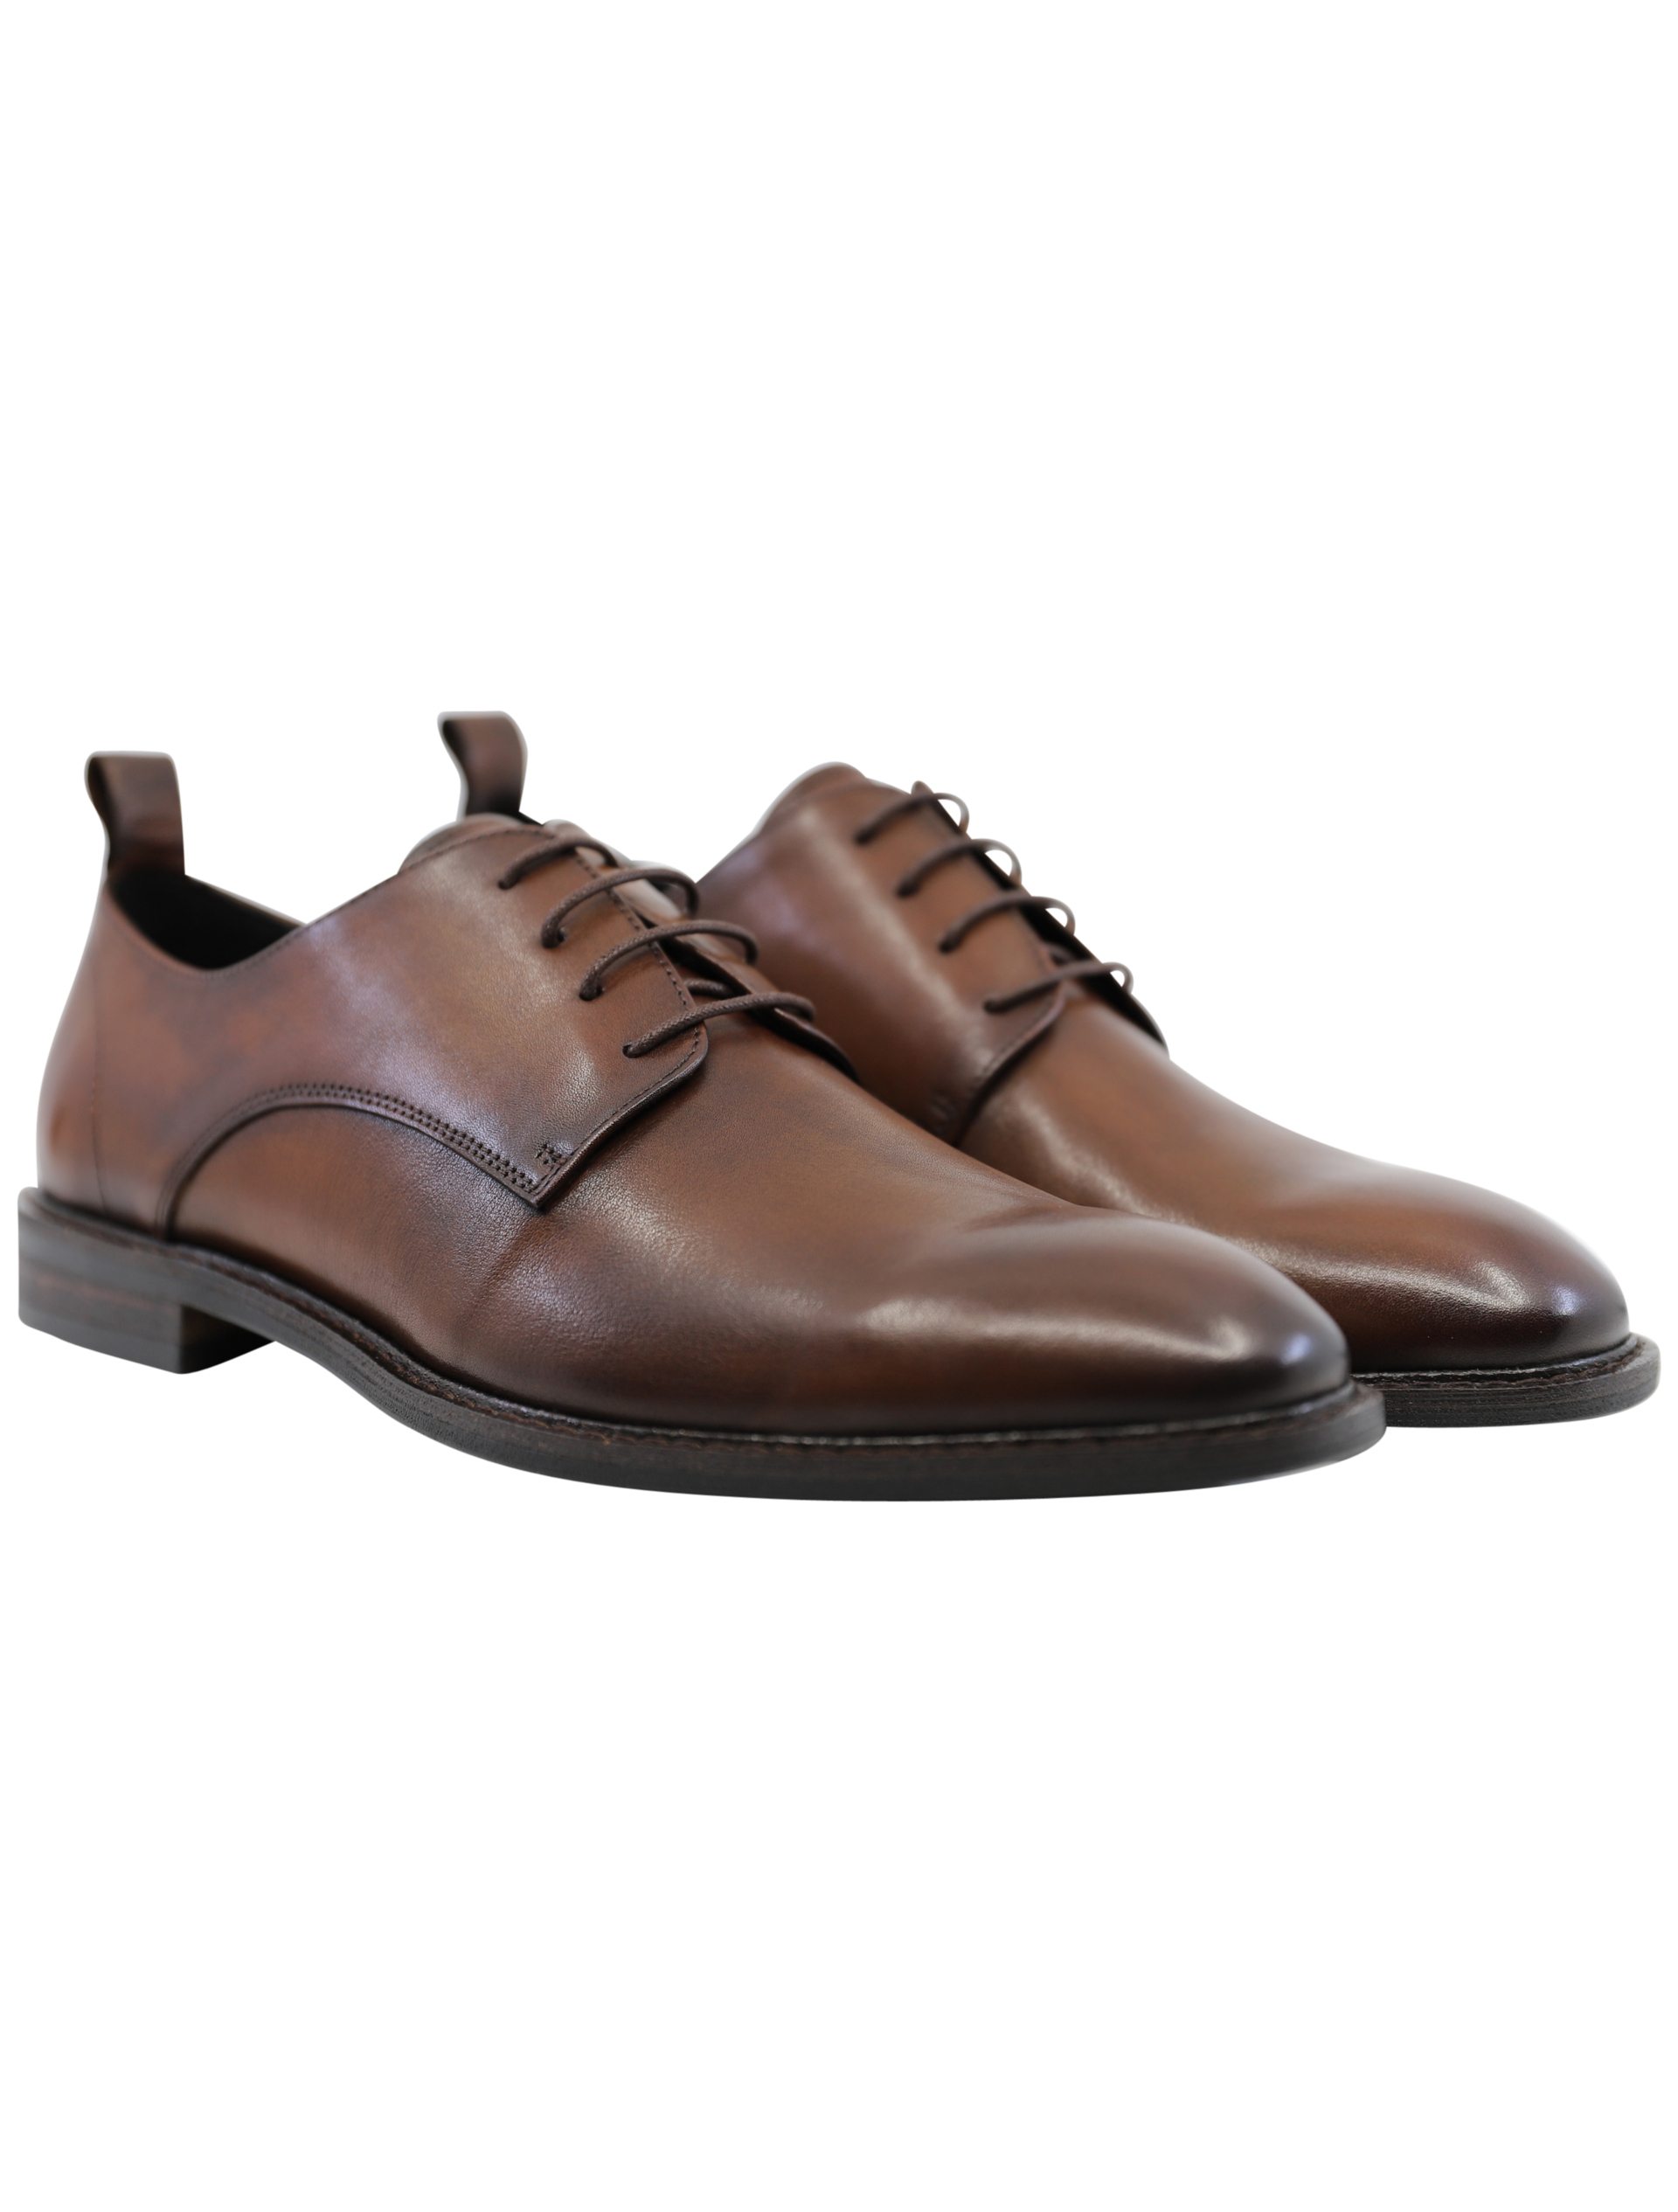 Lindbergh Business shoes brown / brown